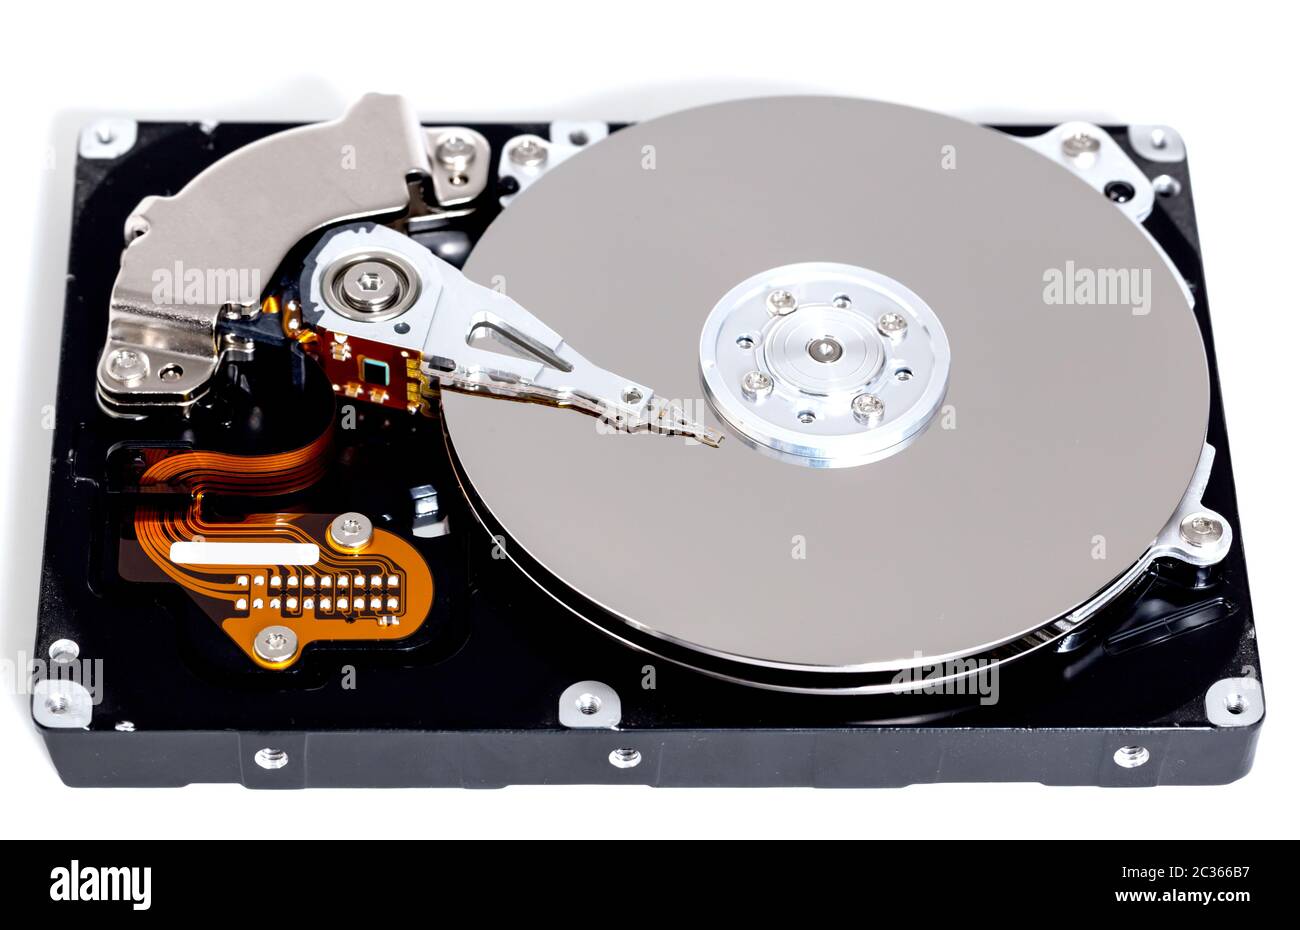 Open hard drive against white background. Stock Photo